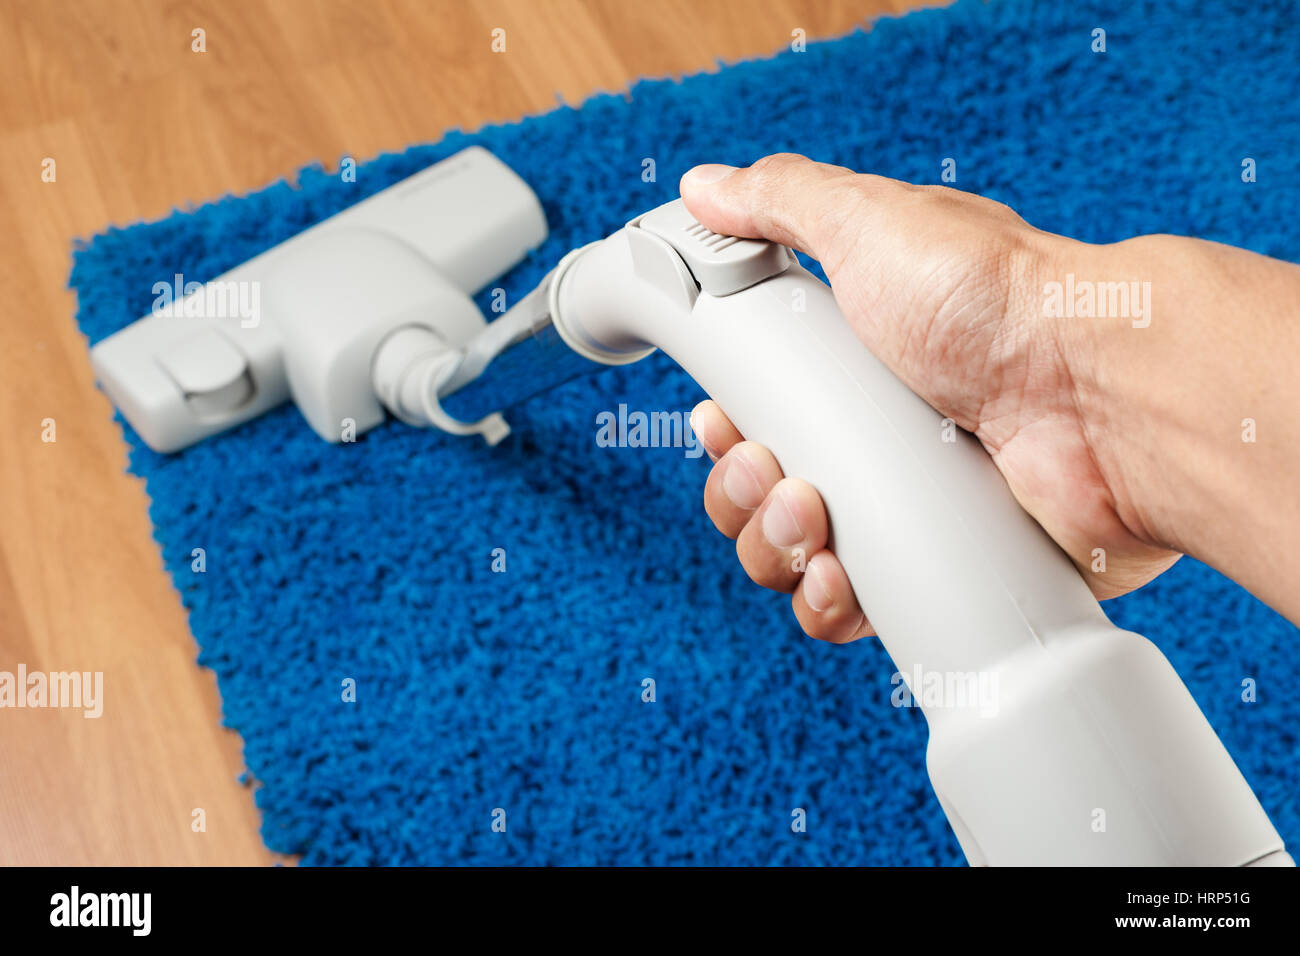 cleaning home with vacuum cleaner, housework concept Stock Photo